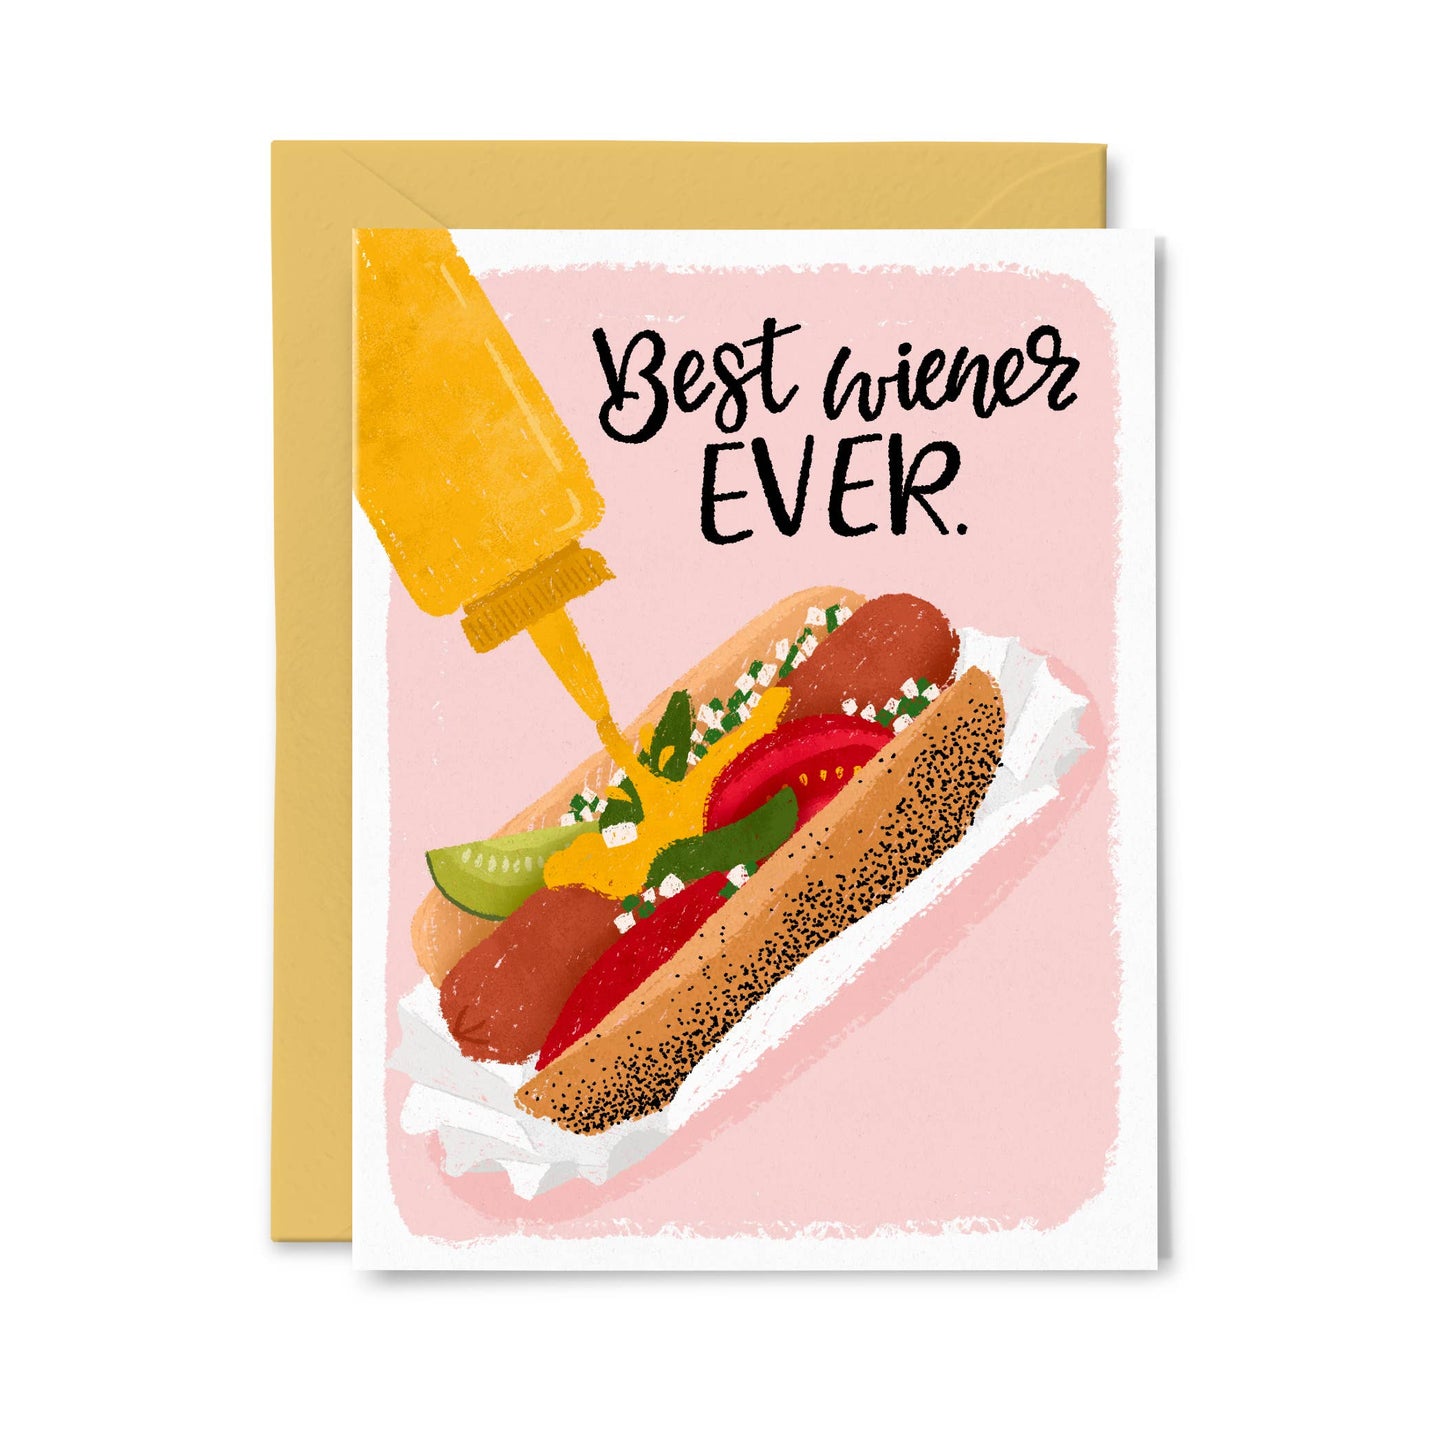 Paper Bunny Press - Best Wiener Ever - Funny Valentine's Day + Love Card